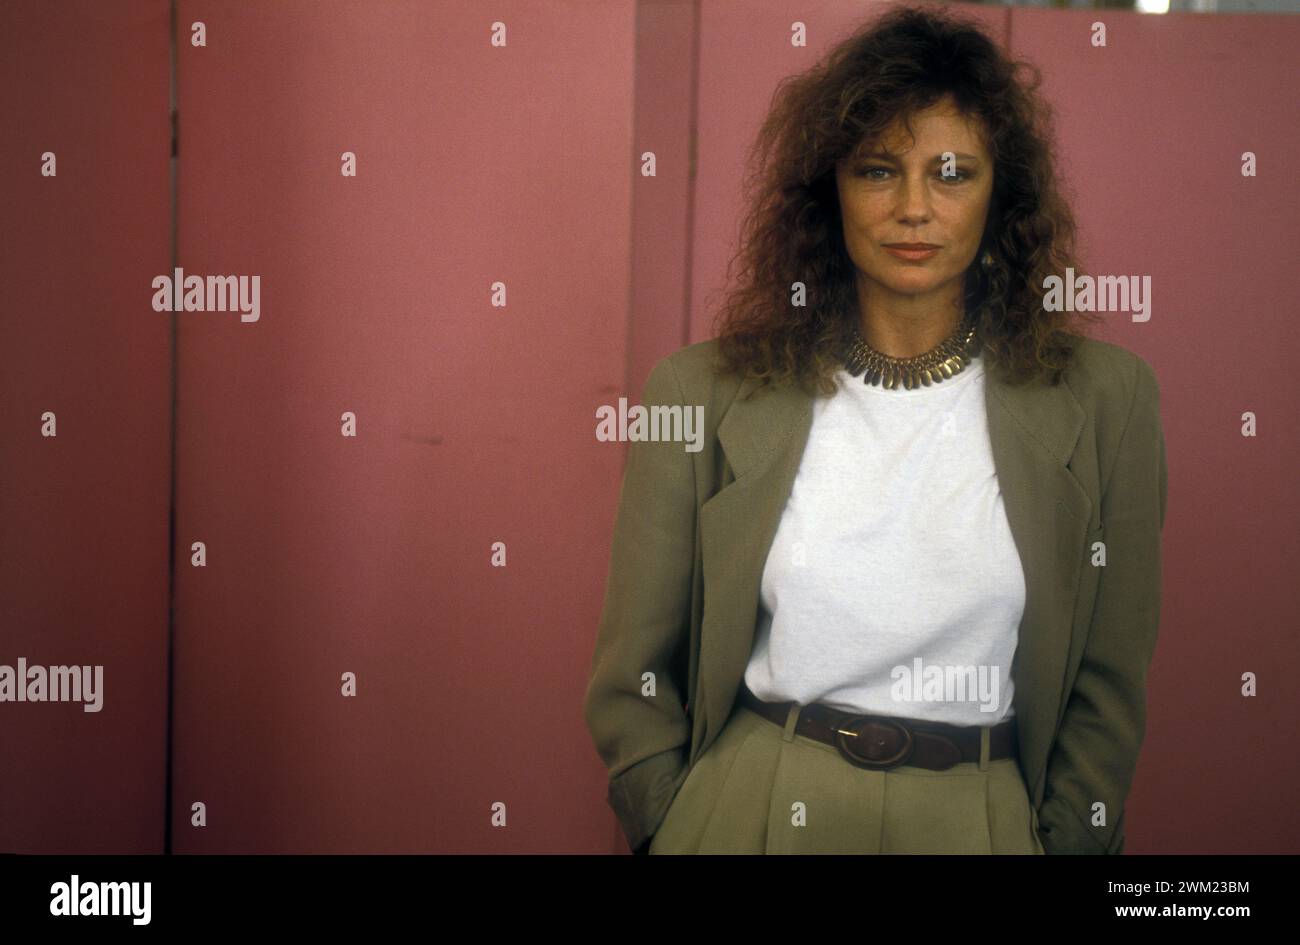 MME4769263 Venice Lido, Venice Film Festival 1989. British actress Jacqueline Bisset, starring in “” Scenes from the Class Struggle in Beverly Hills”” directed by Paul Bartel and presented at the Festival/Lido di Venezia, Venice Film Festival 1989. L'attrice Jacqueline Bisset, protagonista of “” Scene di lotta di classe a Beverly Hills””, diretto by Paul Bartel and presented at the Mostra -; (add.info.: Venice Lido, Venice Film Festival 1989. British actress Jacqueline Bisset, starring in “” Scenes from the Class Struggle in Beverly Hills”” directed by Paul Bartel and presented at the Festiva Stock Photo